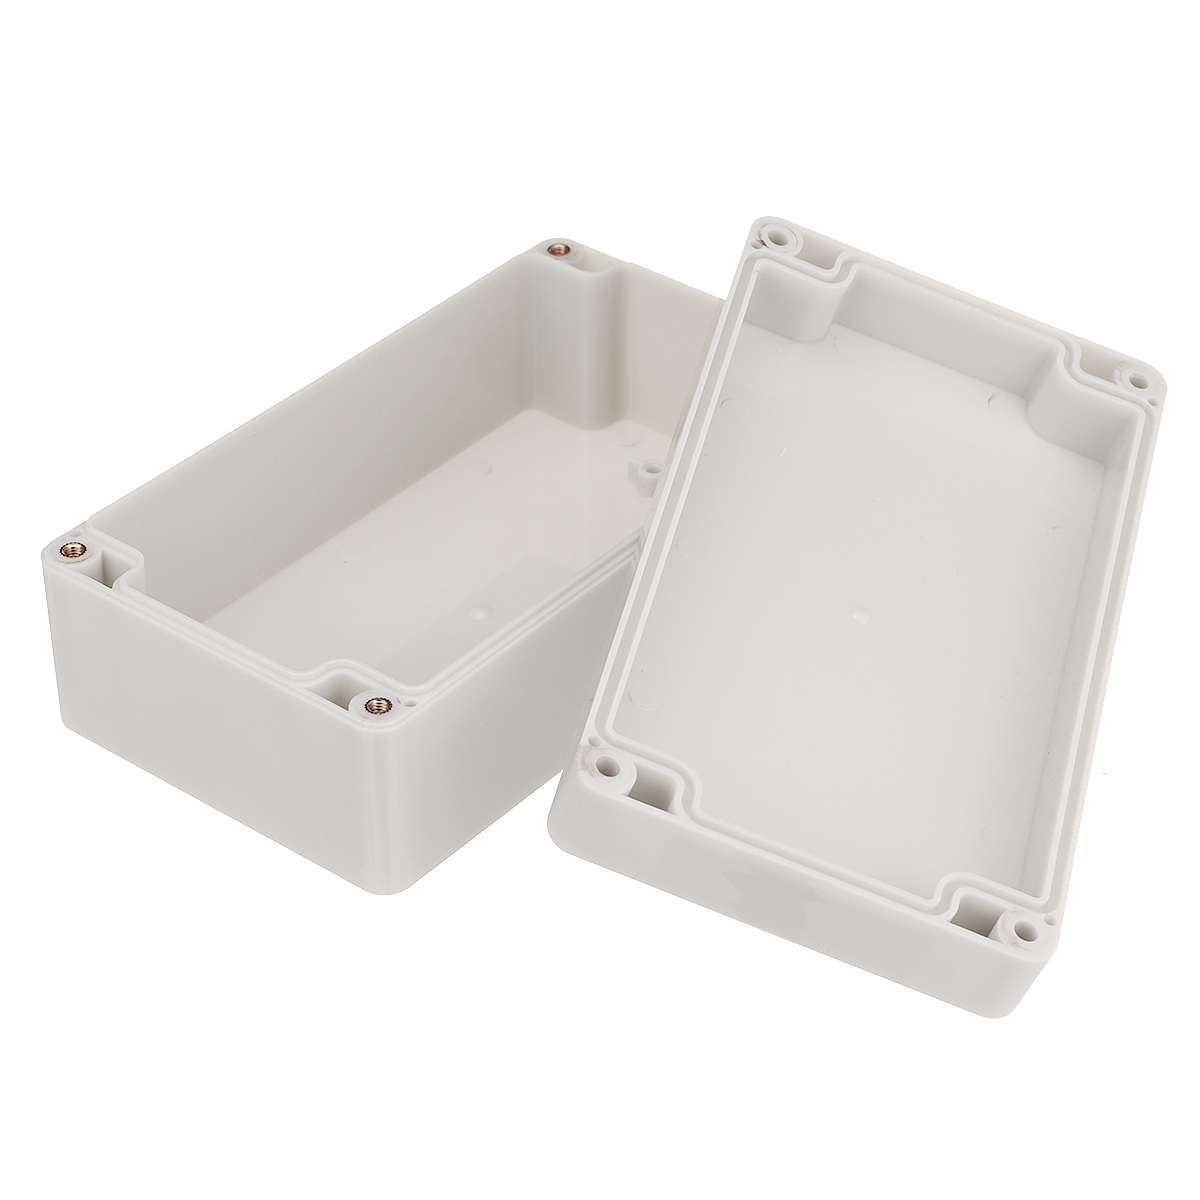 Waterproof-Plastic-Enclosure-Box-Electronic-Project-Case-Electrical-Project-Box-Outdoor-Junction-Box-1678840-7